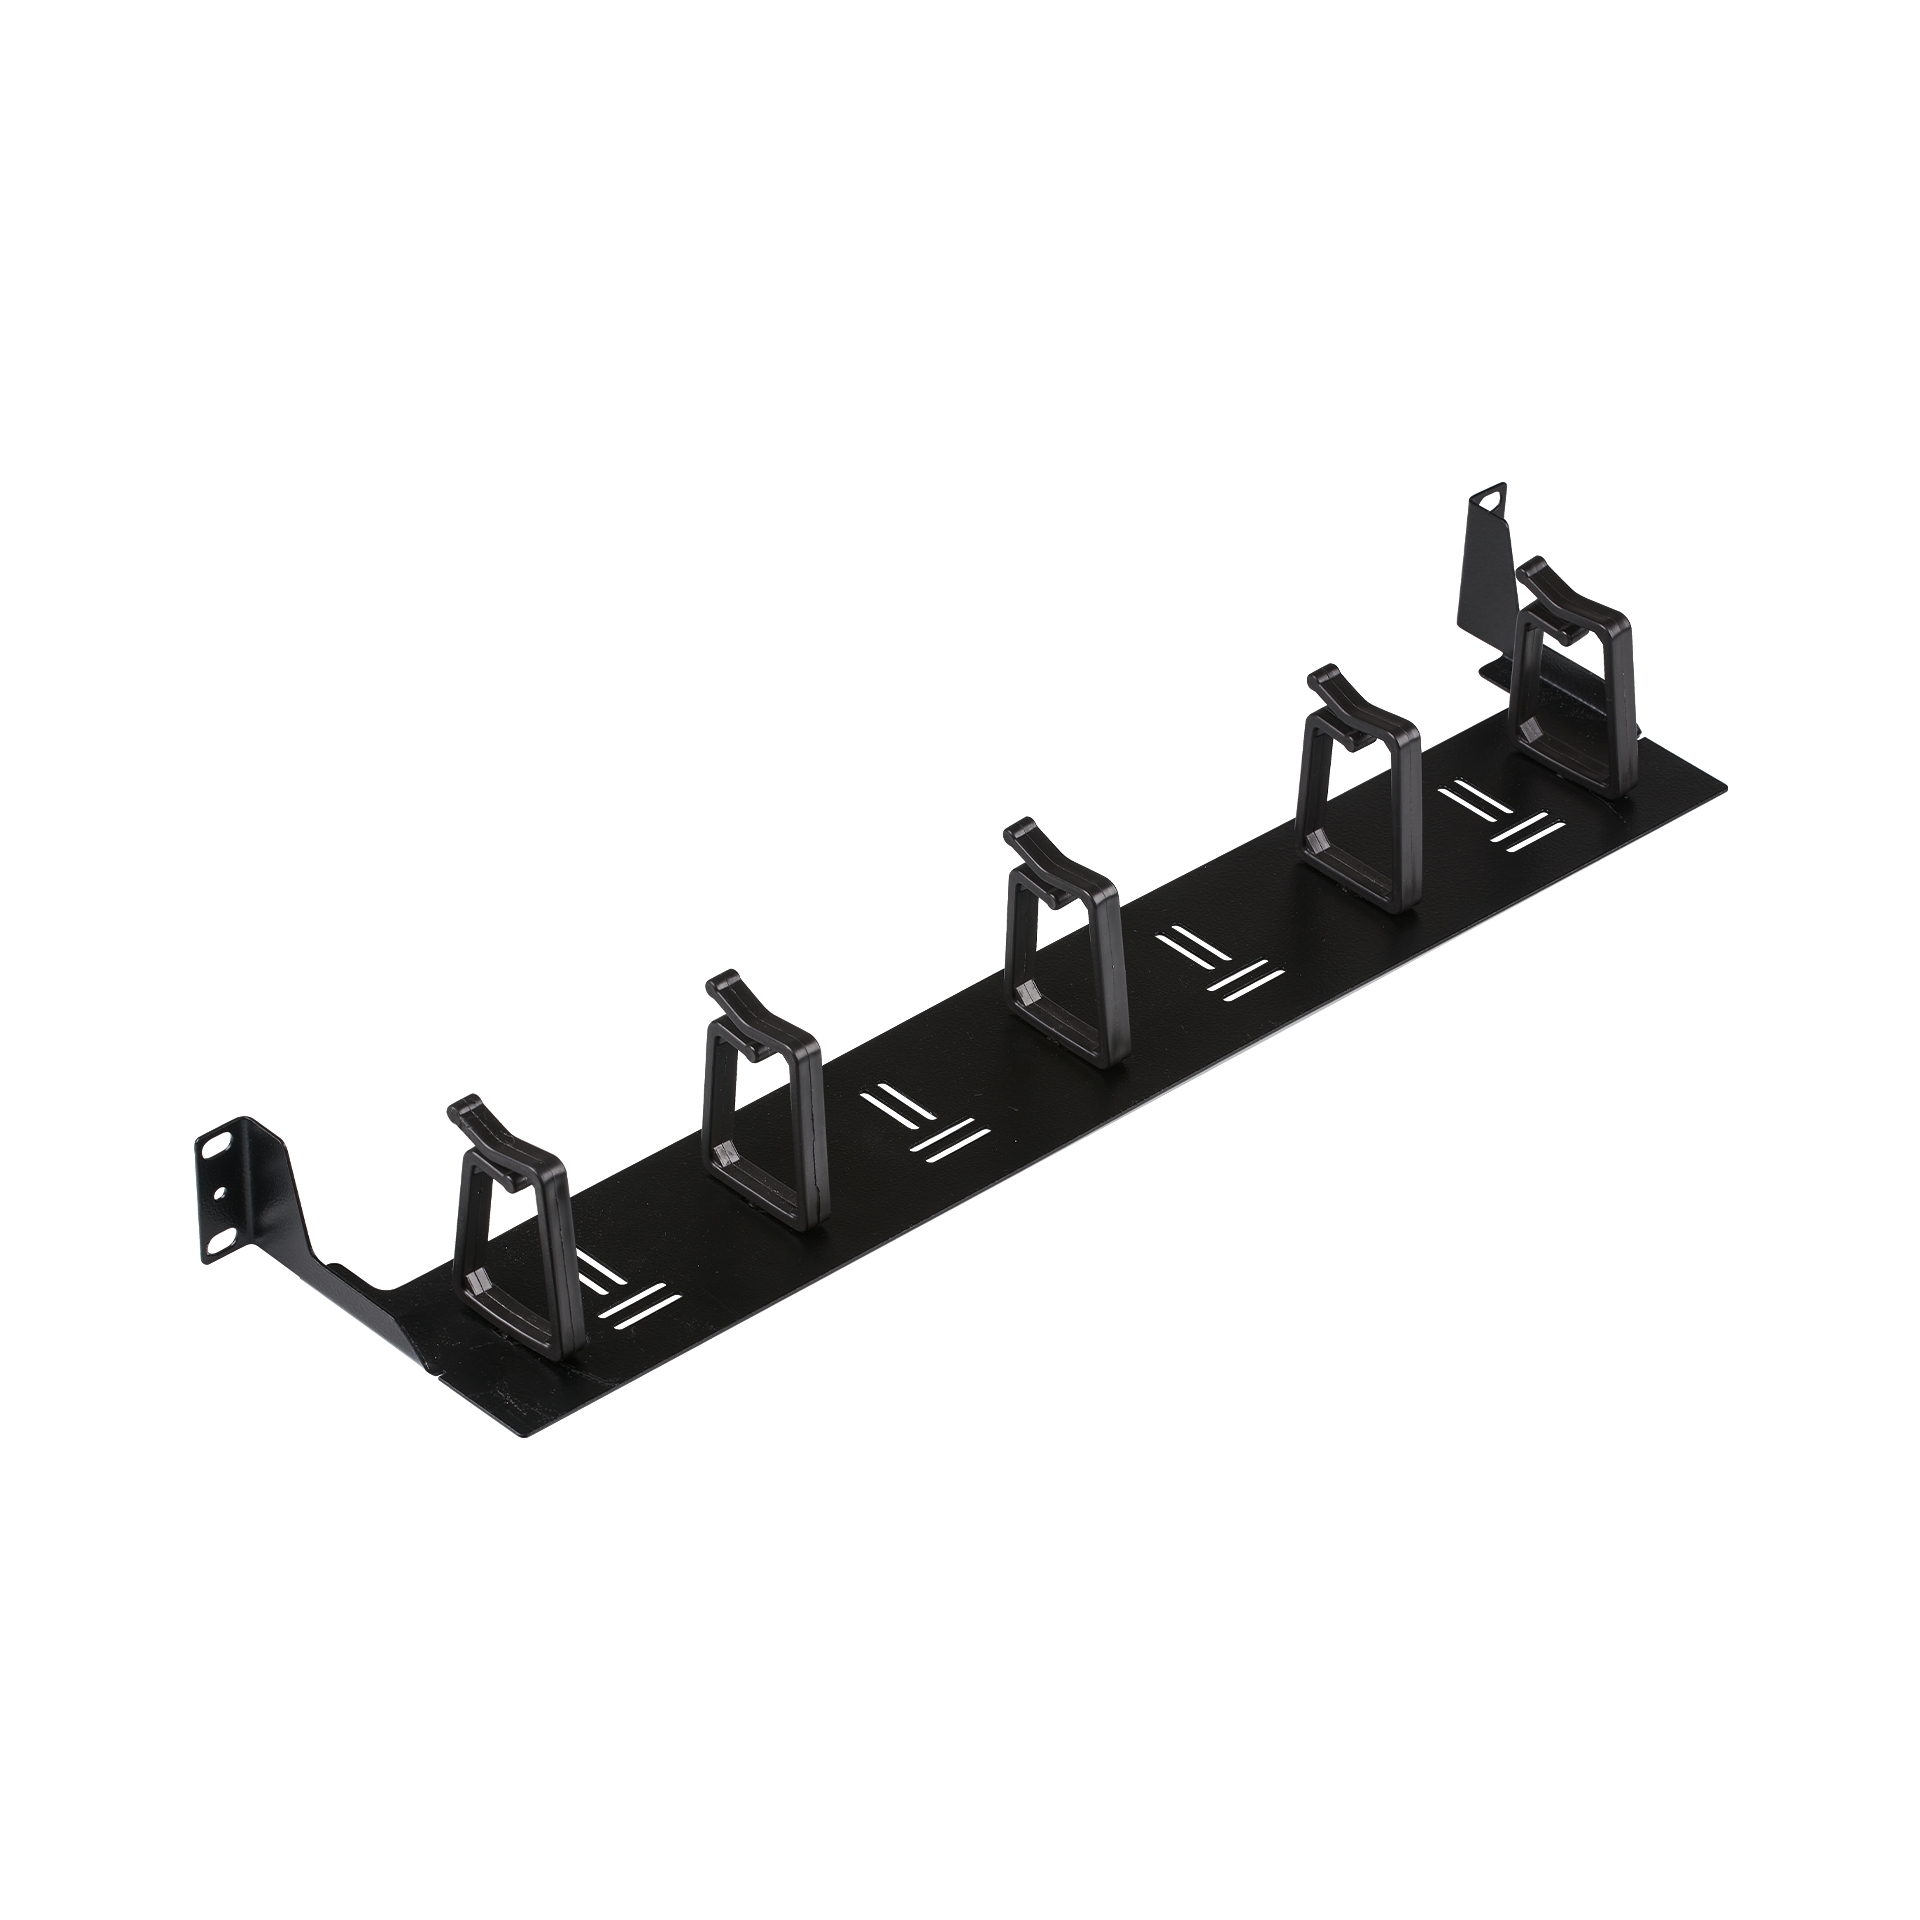 19" 0U Cable Routing Bracket, 5 Brackets, RAL9005